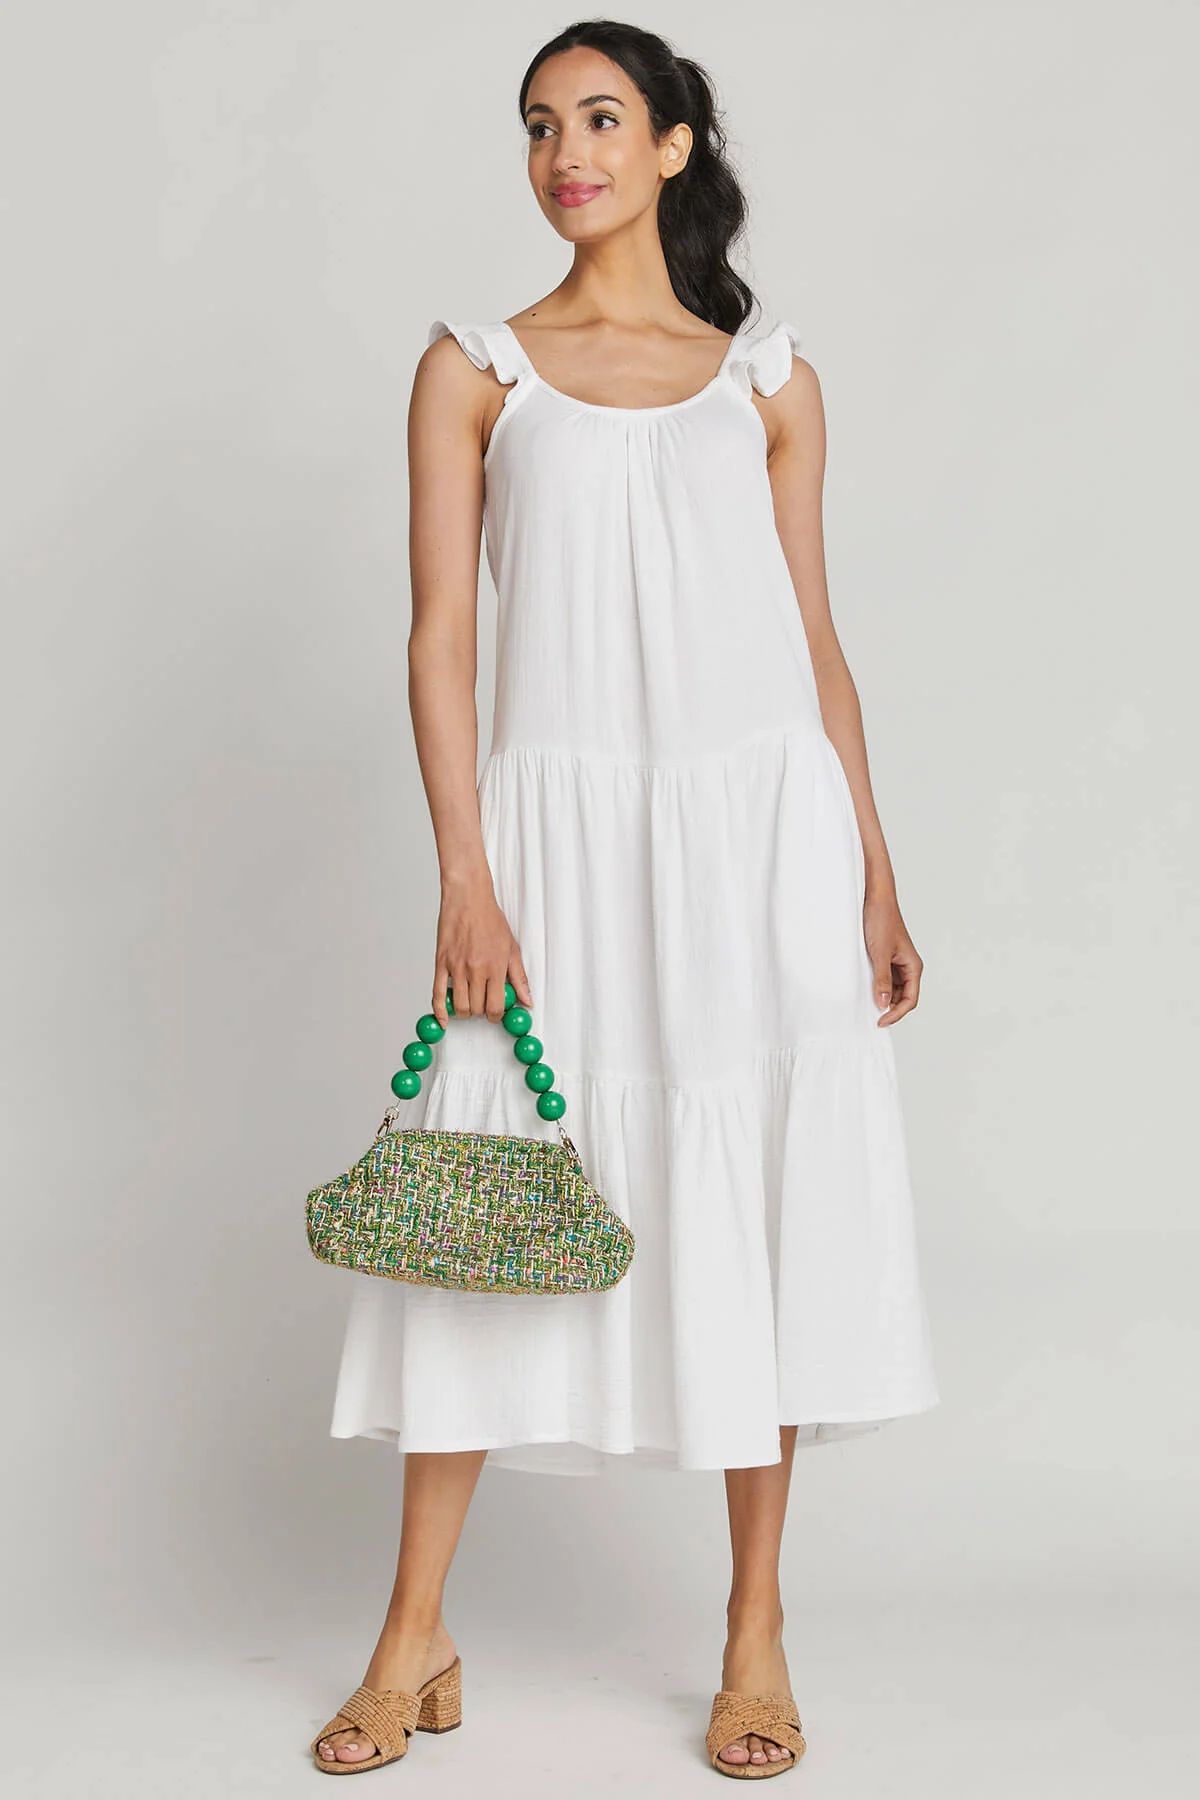 RD Style Woven Tiered Dress | Social Threads